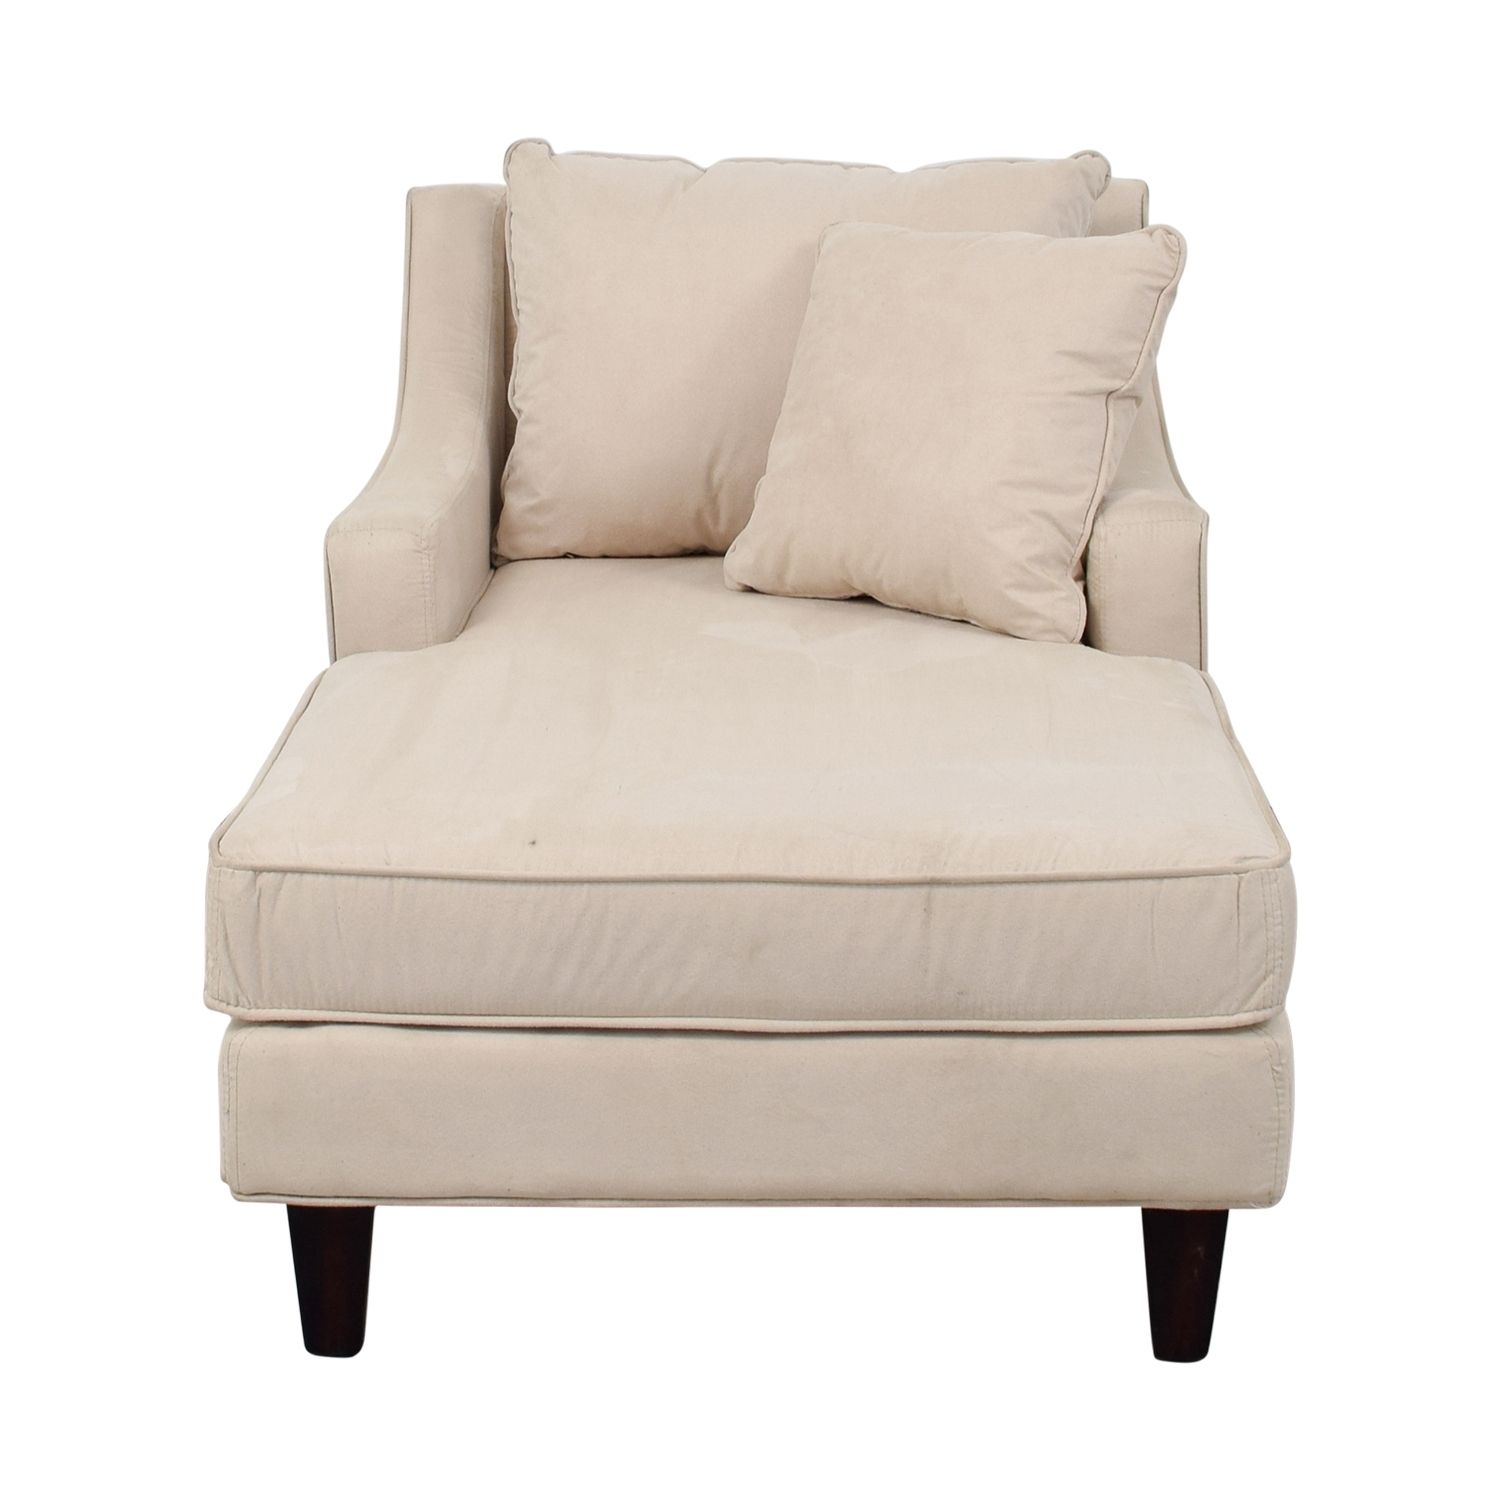 [%80% Off – Coaster Coaster Beige Microfiber Chaise Lounger / Sofas Intended For Best And Newest Microfiber Chaises|microfiber Chaises Inside Most Current 80% Off – Coaster Coaster Beige Microfiber Chaise Lounger / Sofas|well Known Microfiber Chaises Within 80% Off – Coaster Coaster Beige Microfiber Chaise Lounger / Sofas|favorite 80% Off – Coaster Coaster Beige Microfiber Chaise Lounger / Sofas Pertaining To Microfiber Chaises%] (View 13 of 15)